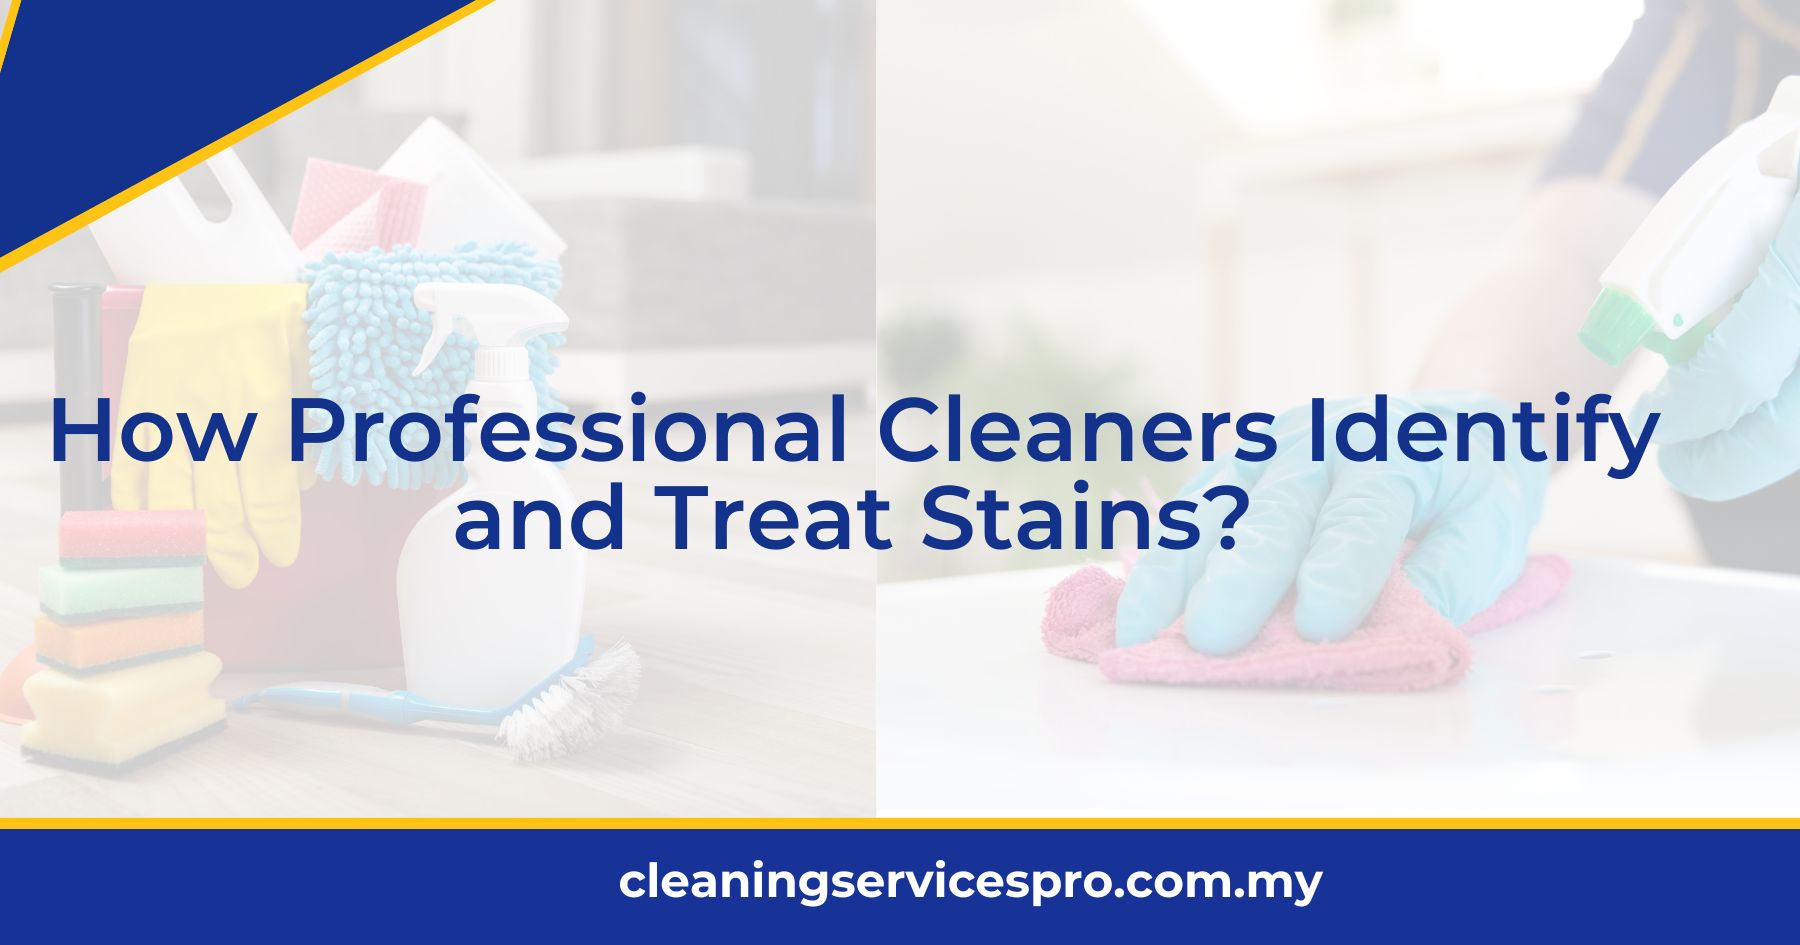 How Professional Cleaners Identify and Treat Stains?